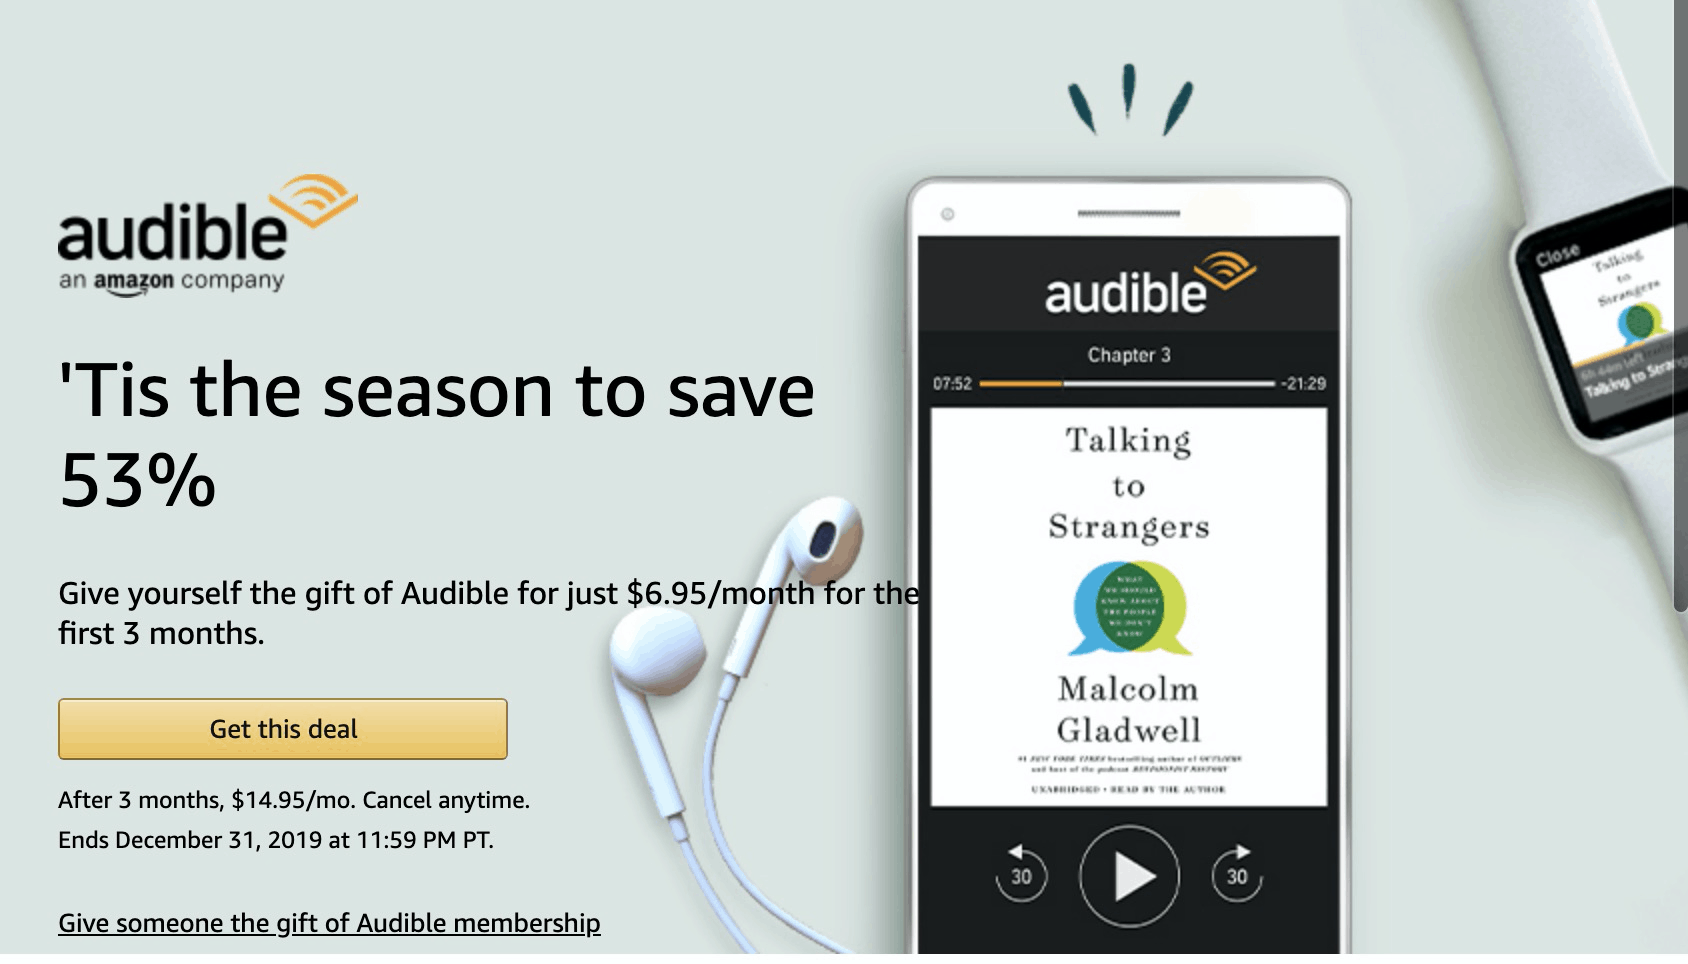 Audible Cyber Monday Deal 6.95 a Month for 3 Months or 1 Month FREE